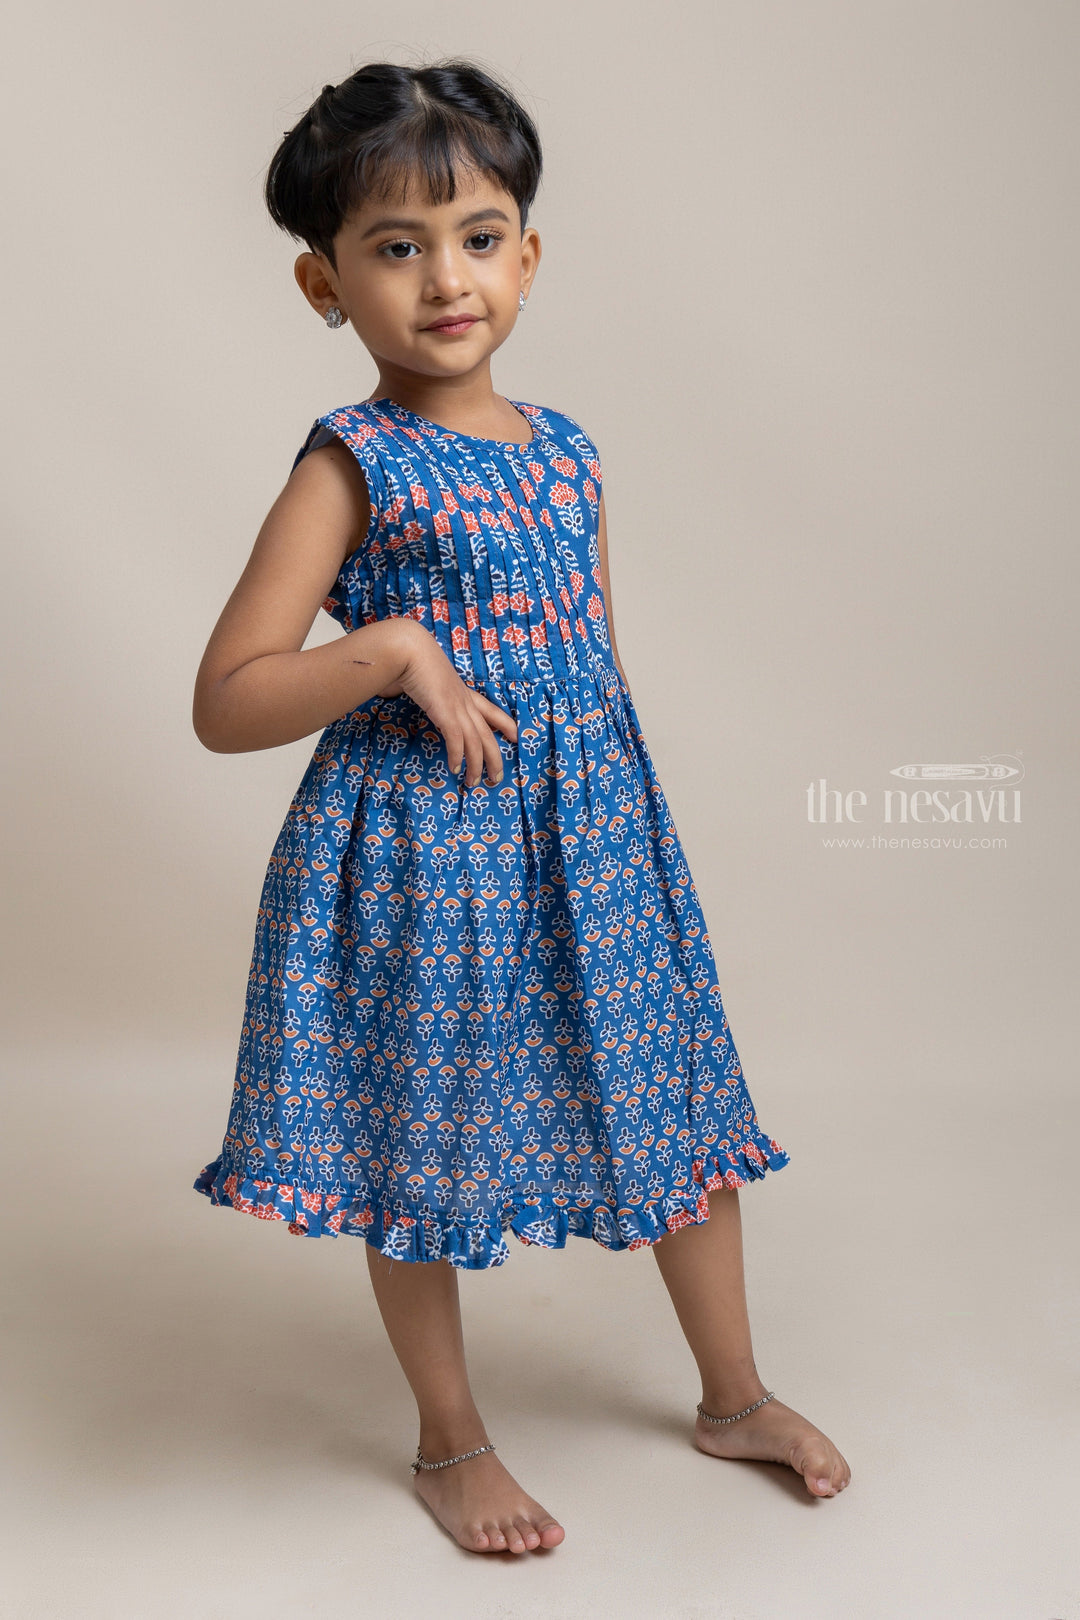 The Nesavu Girls Fancy Frock Gorgeous Blue Pleated Yoke With Floral Printed Sleeveless Cotton Frock For Girls Nesavu Pretty Floral Printed Cotton Frock For Girls | Trendy Cotton Frocks | The Nesavu